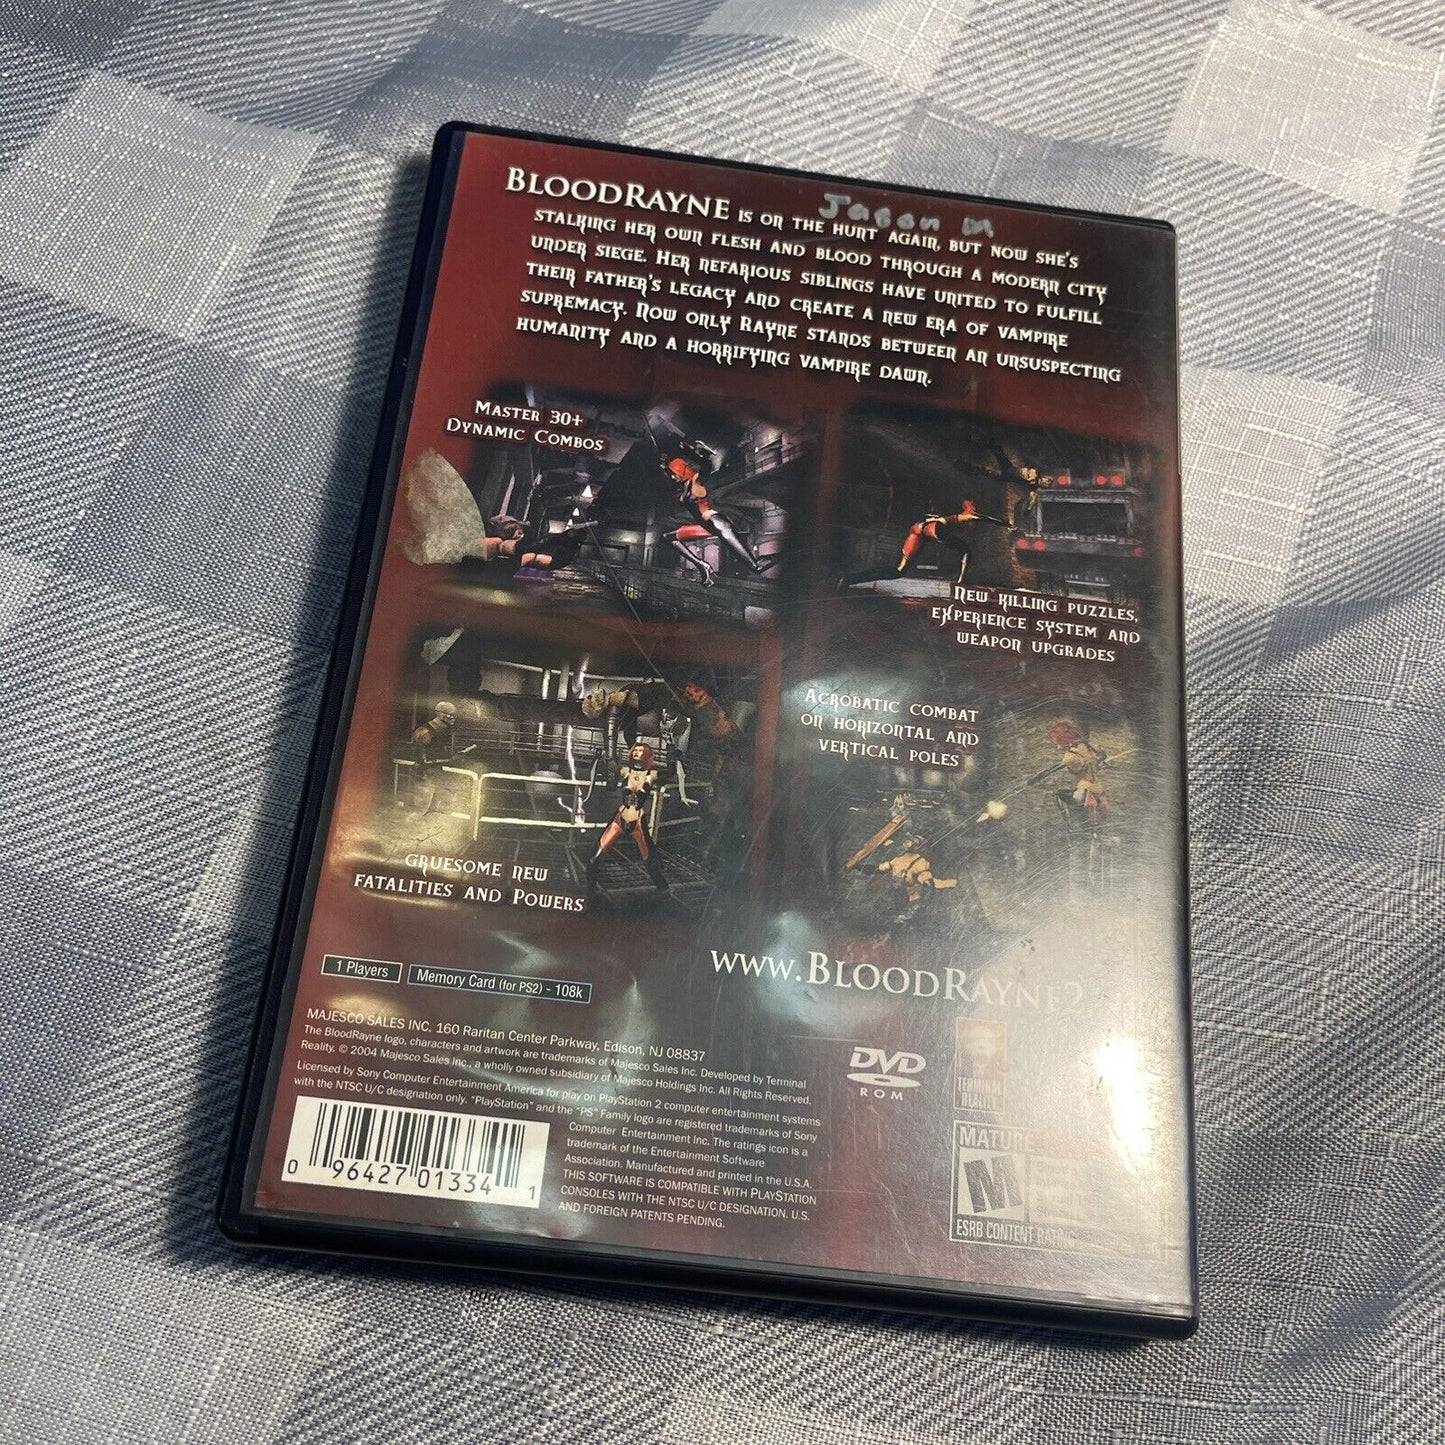 BloodRayne 2 for Sony Playstation 2 PS2 Complete with Manual Great Tested